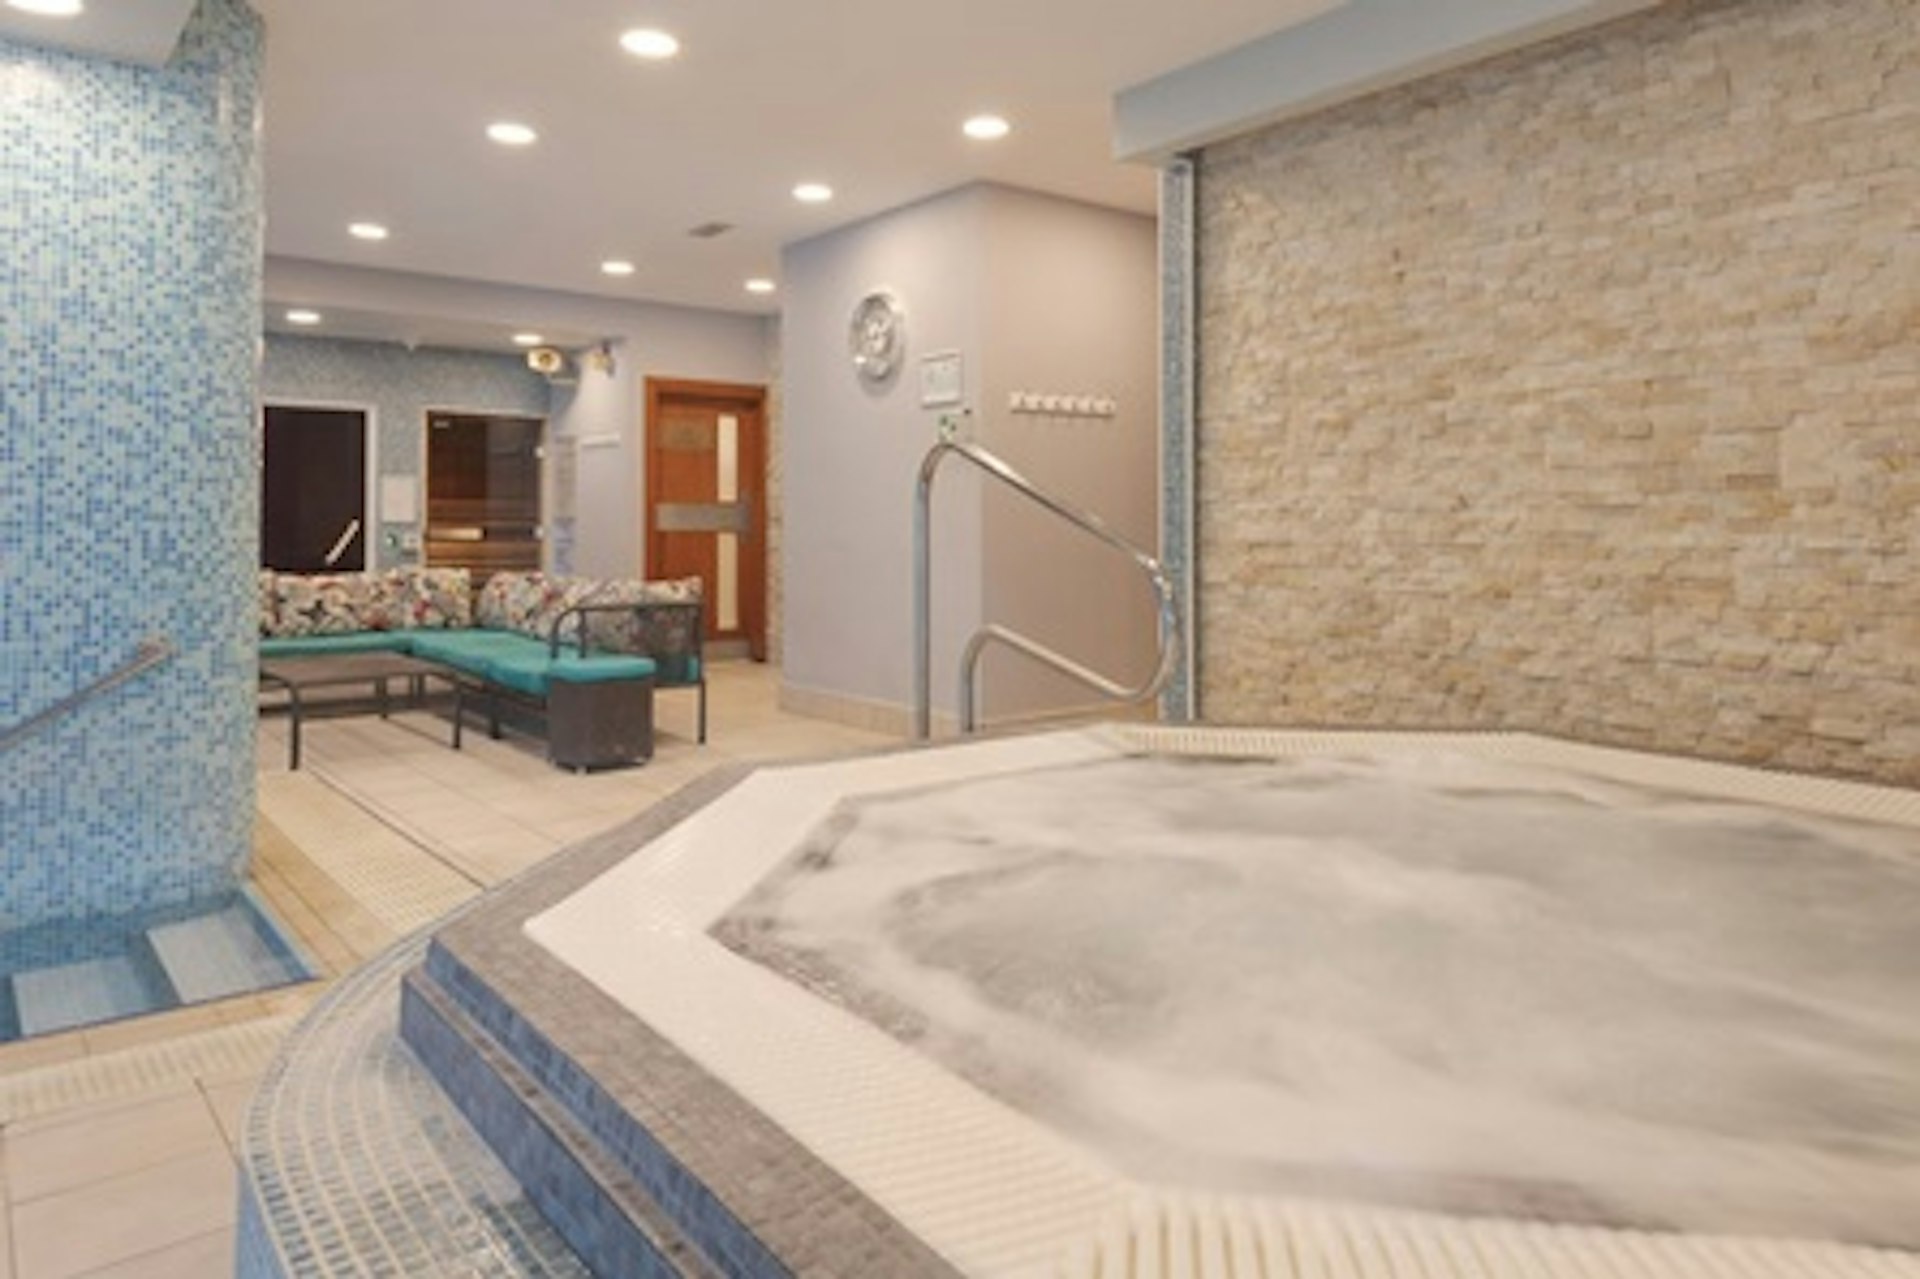 Weekday Serenity Spa Day with Treatment, Lunch and Fizz at the 4* Q Hotels Collection 1